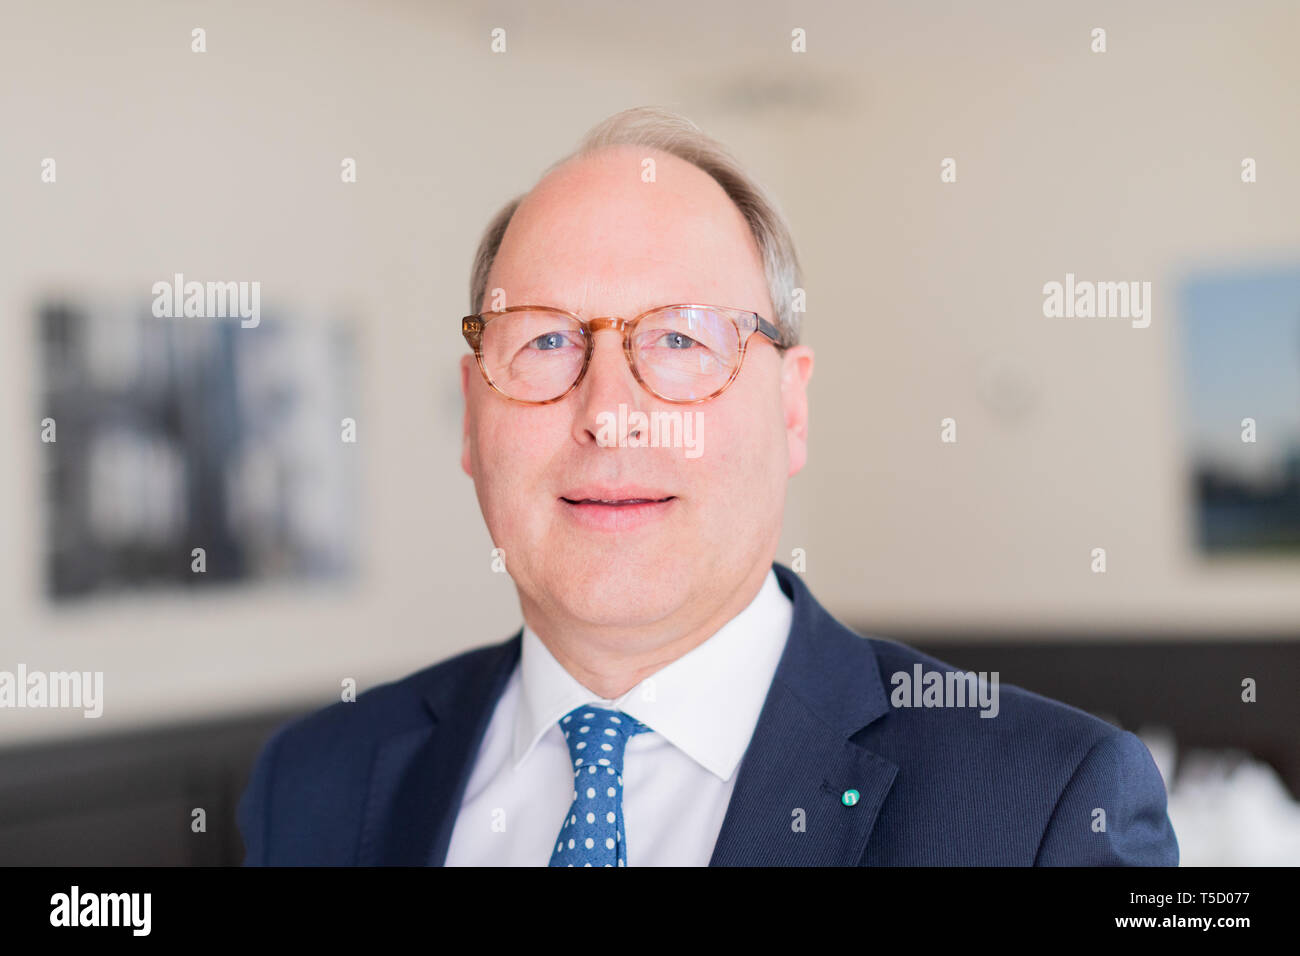 24 April 2019, North Rhine-Westphalia, Düsseldorf: Stefan Genth, Managing Director of the Handelsverband Deutschland (HDE), admitted to the Industrieclub. Here he provided information about the start of the retail trade in 2019 and the expectations of the industry for the year as a whole. Photo: Rolf Vennenbernd/dpa Stock Photo